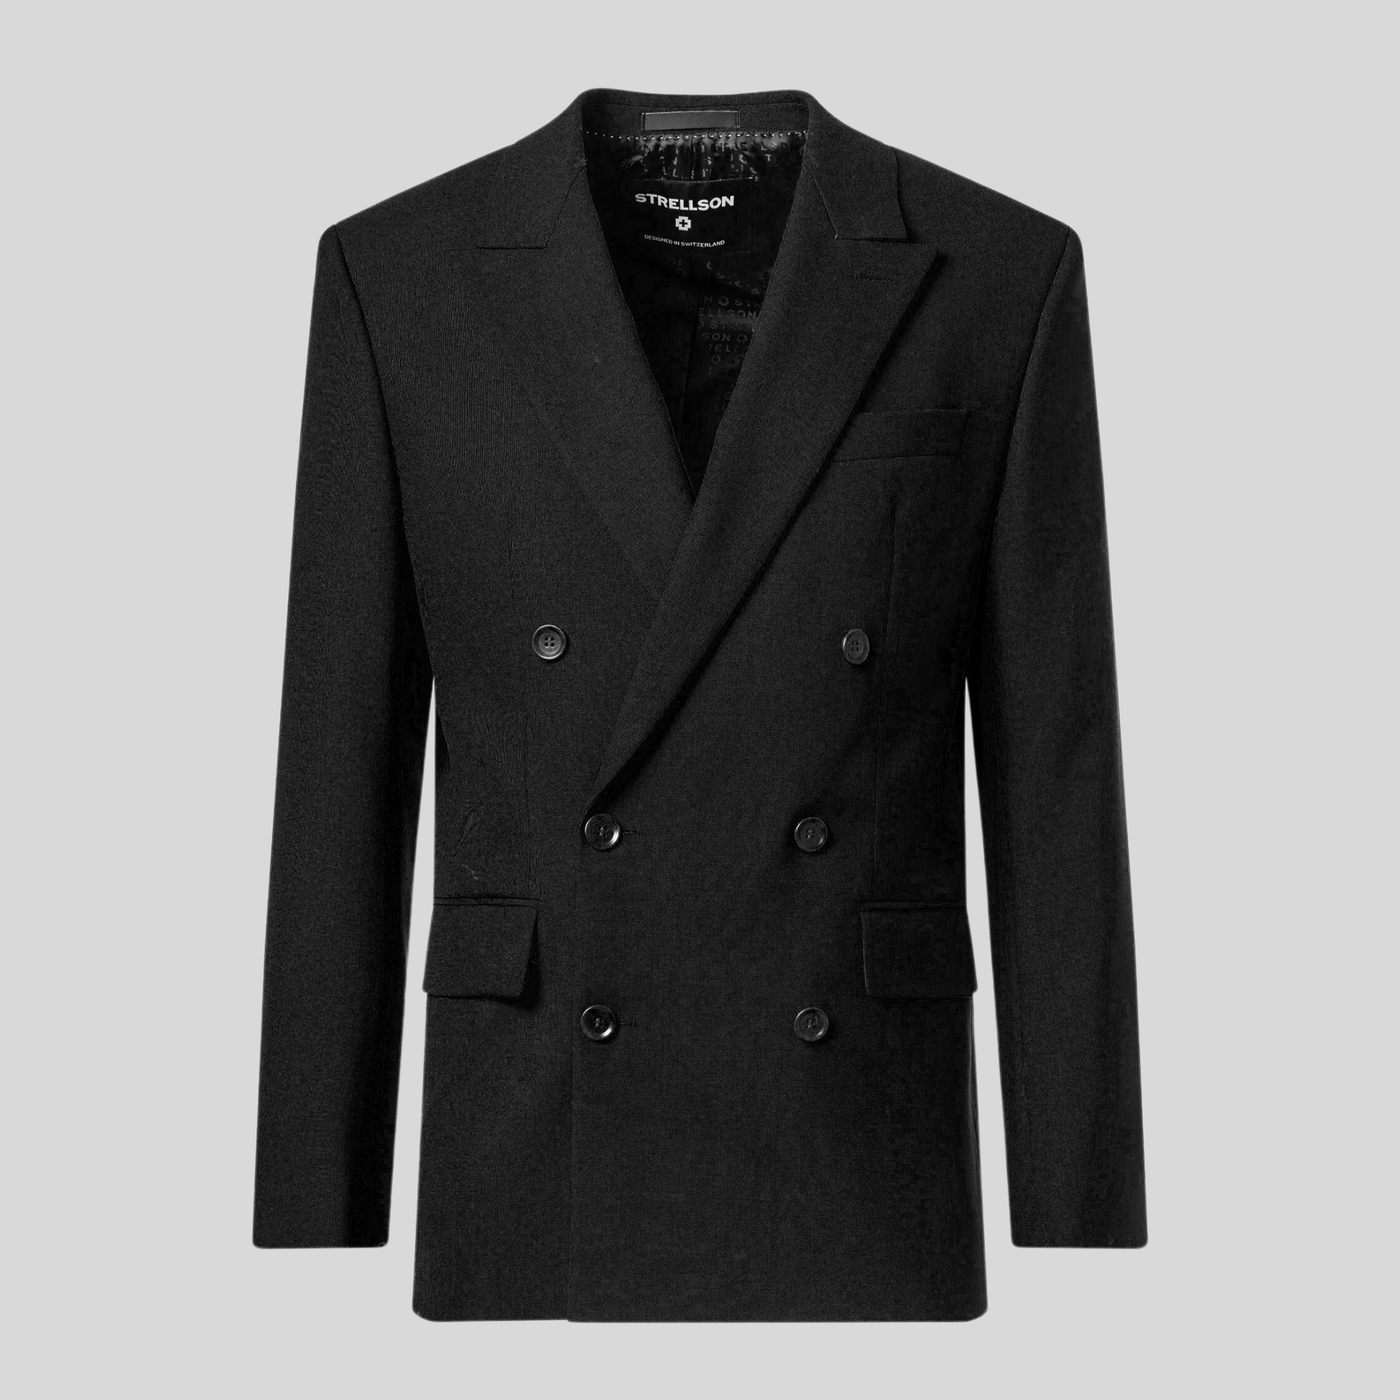 Gotstyle Fashion - Strellson Suits Double Breasted Slim Fit Wool Blazer - Black